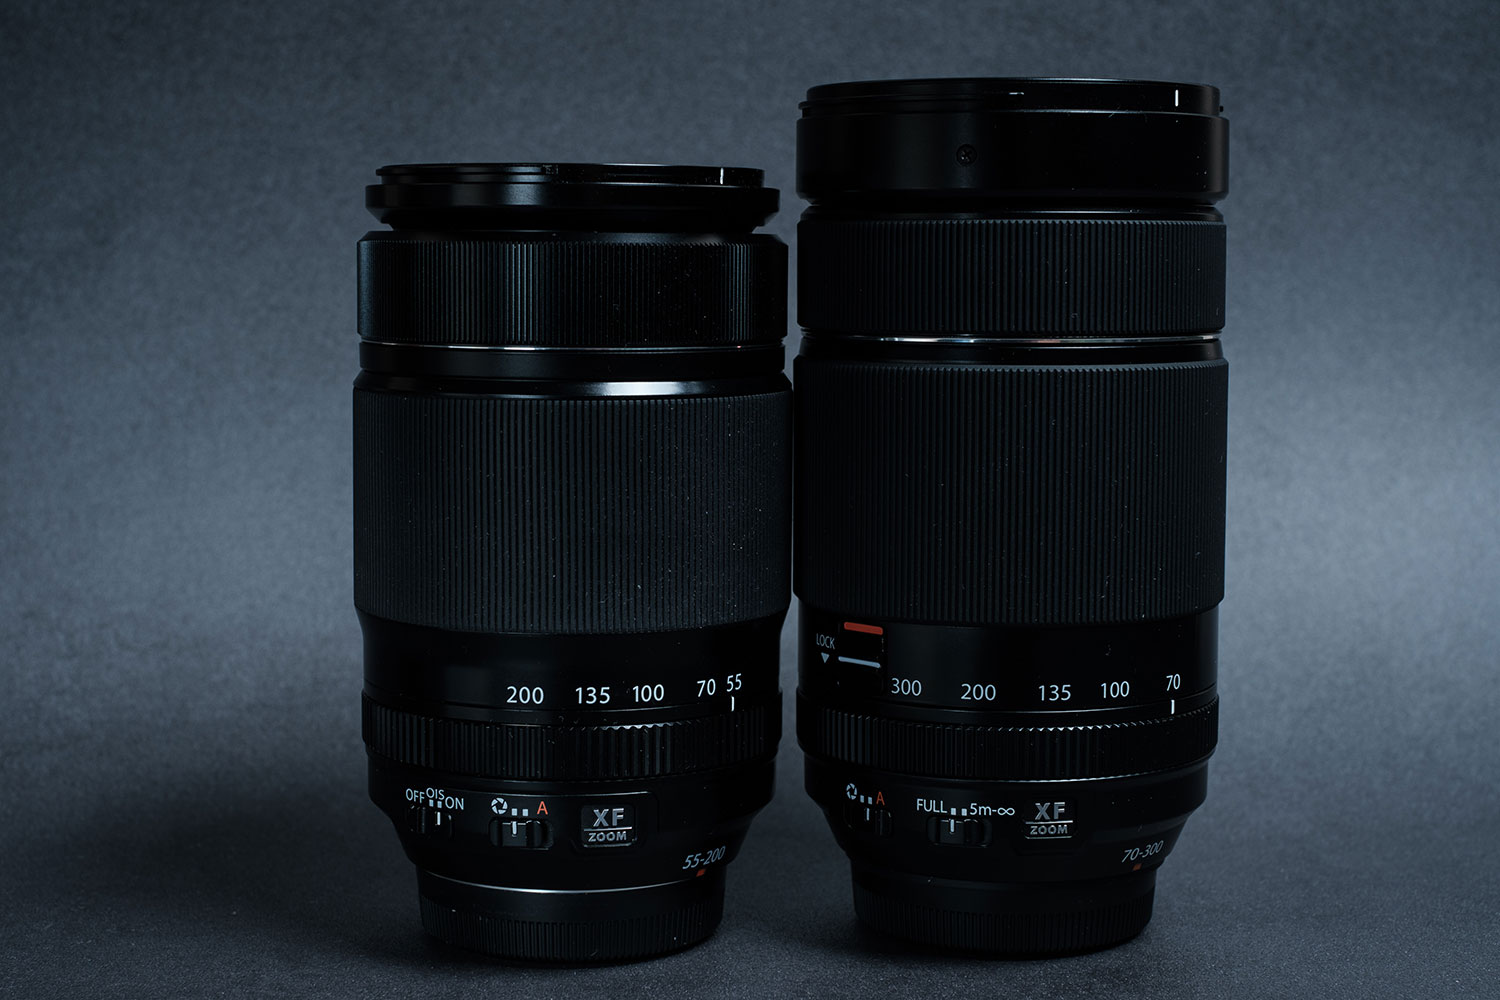 XF 70-300mm f/4-5.6R LM OIS - The Newcomer - Fuji X Passion